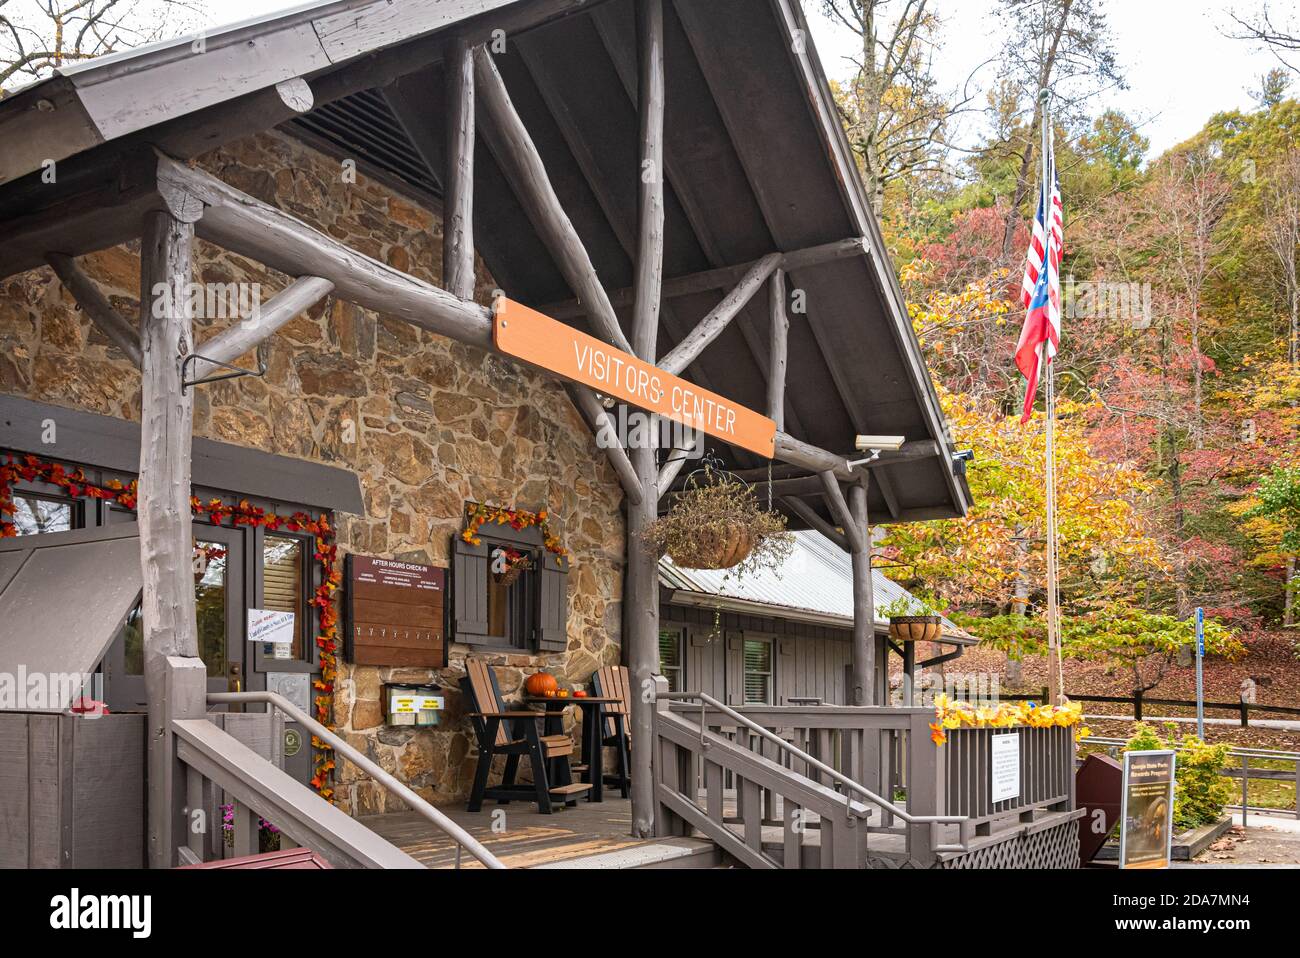 Visitors Center at Vogel State Park, nestled in the Blue Ridge Mountains near Blairsville, Georgia. (USA) Stock Photo